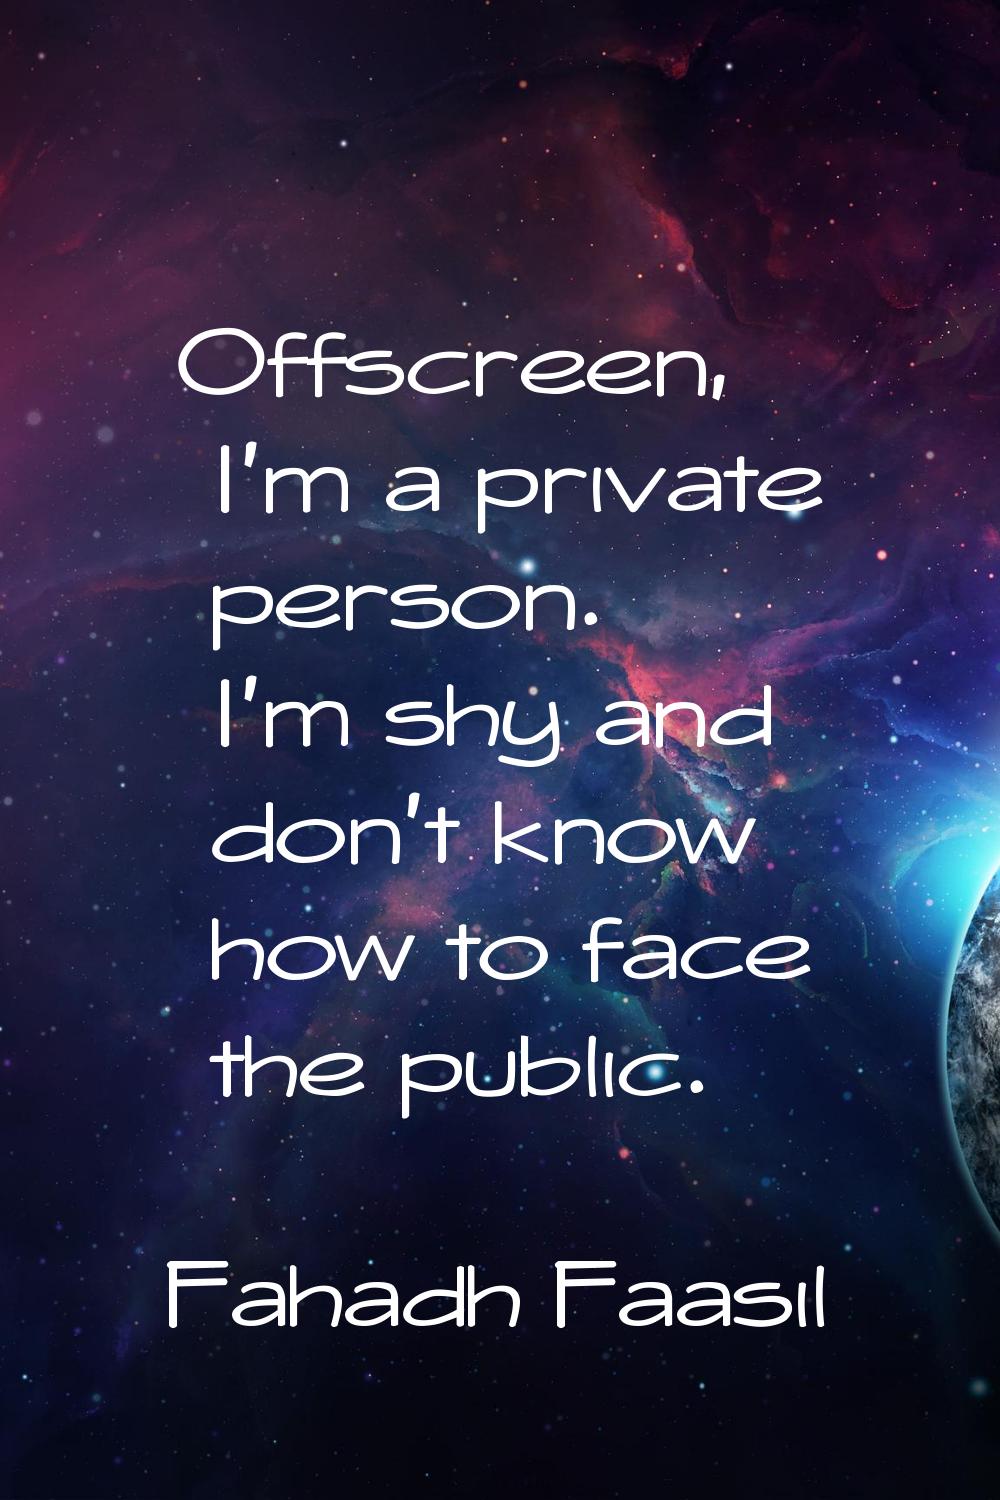 Offscreen, I'm a private person. I'm shy and don't know how to face the public.